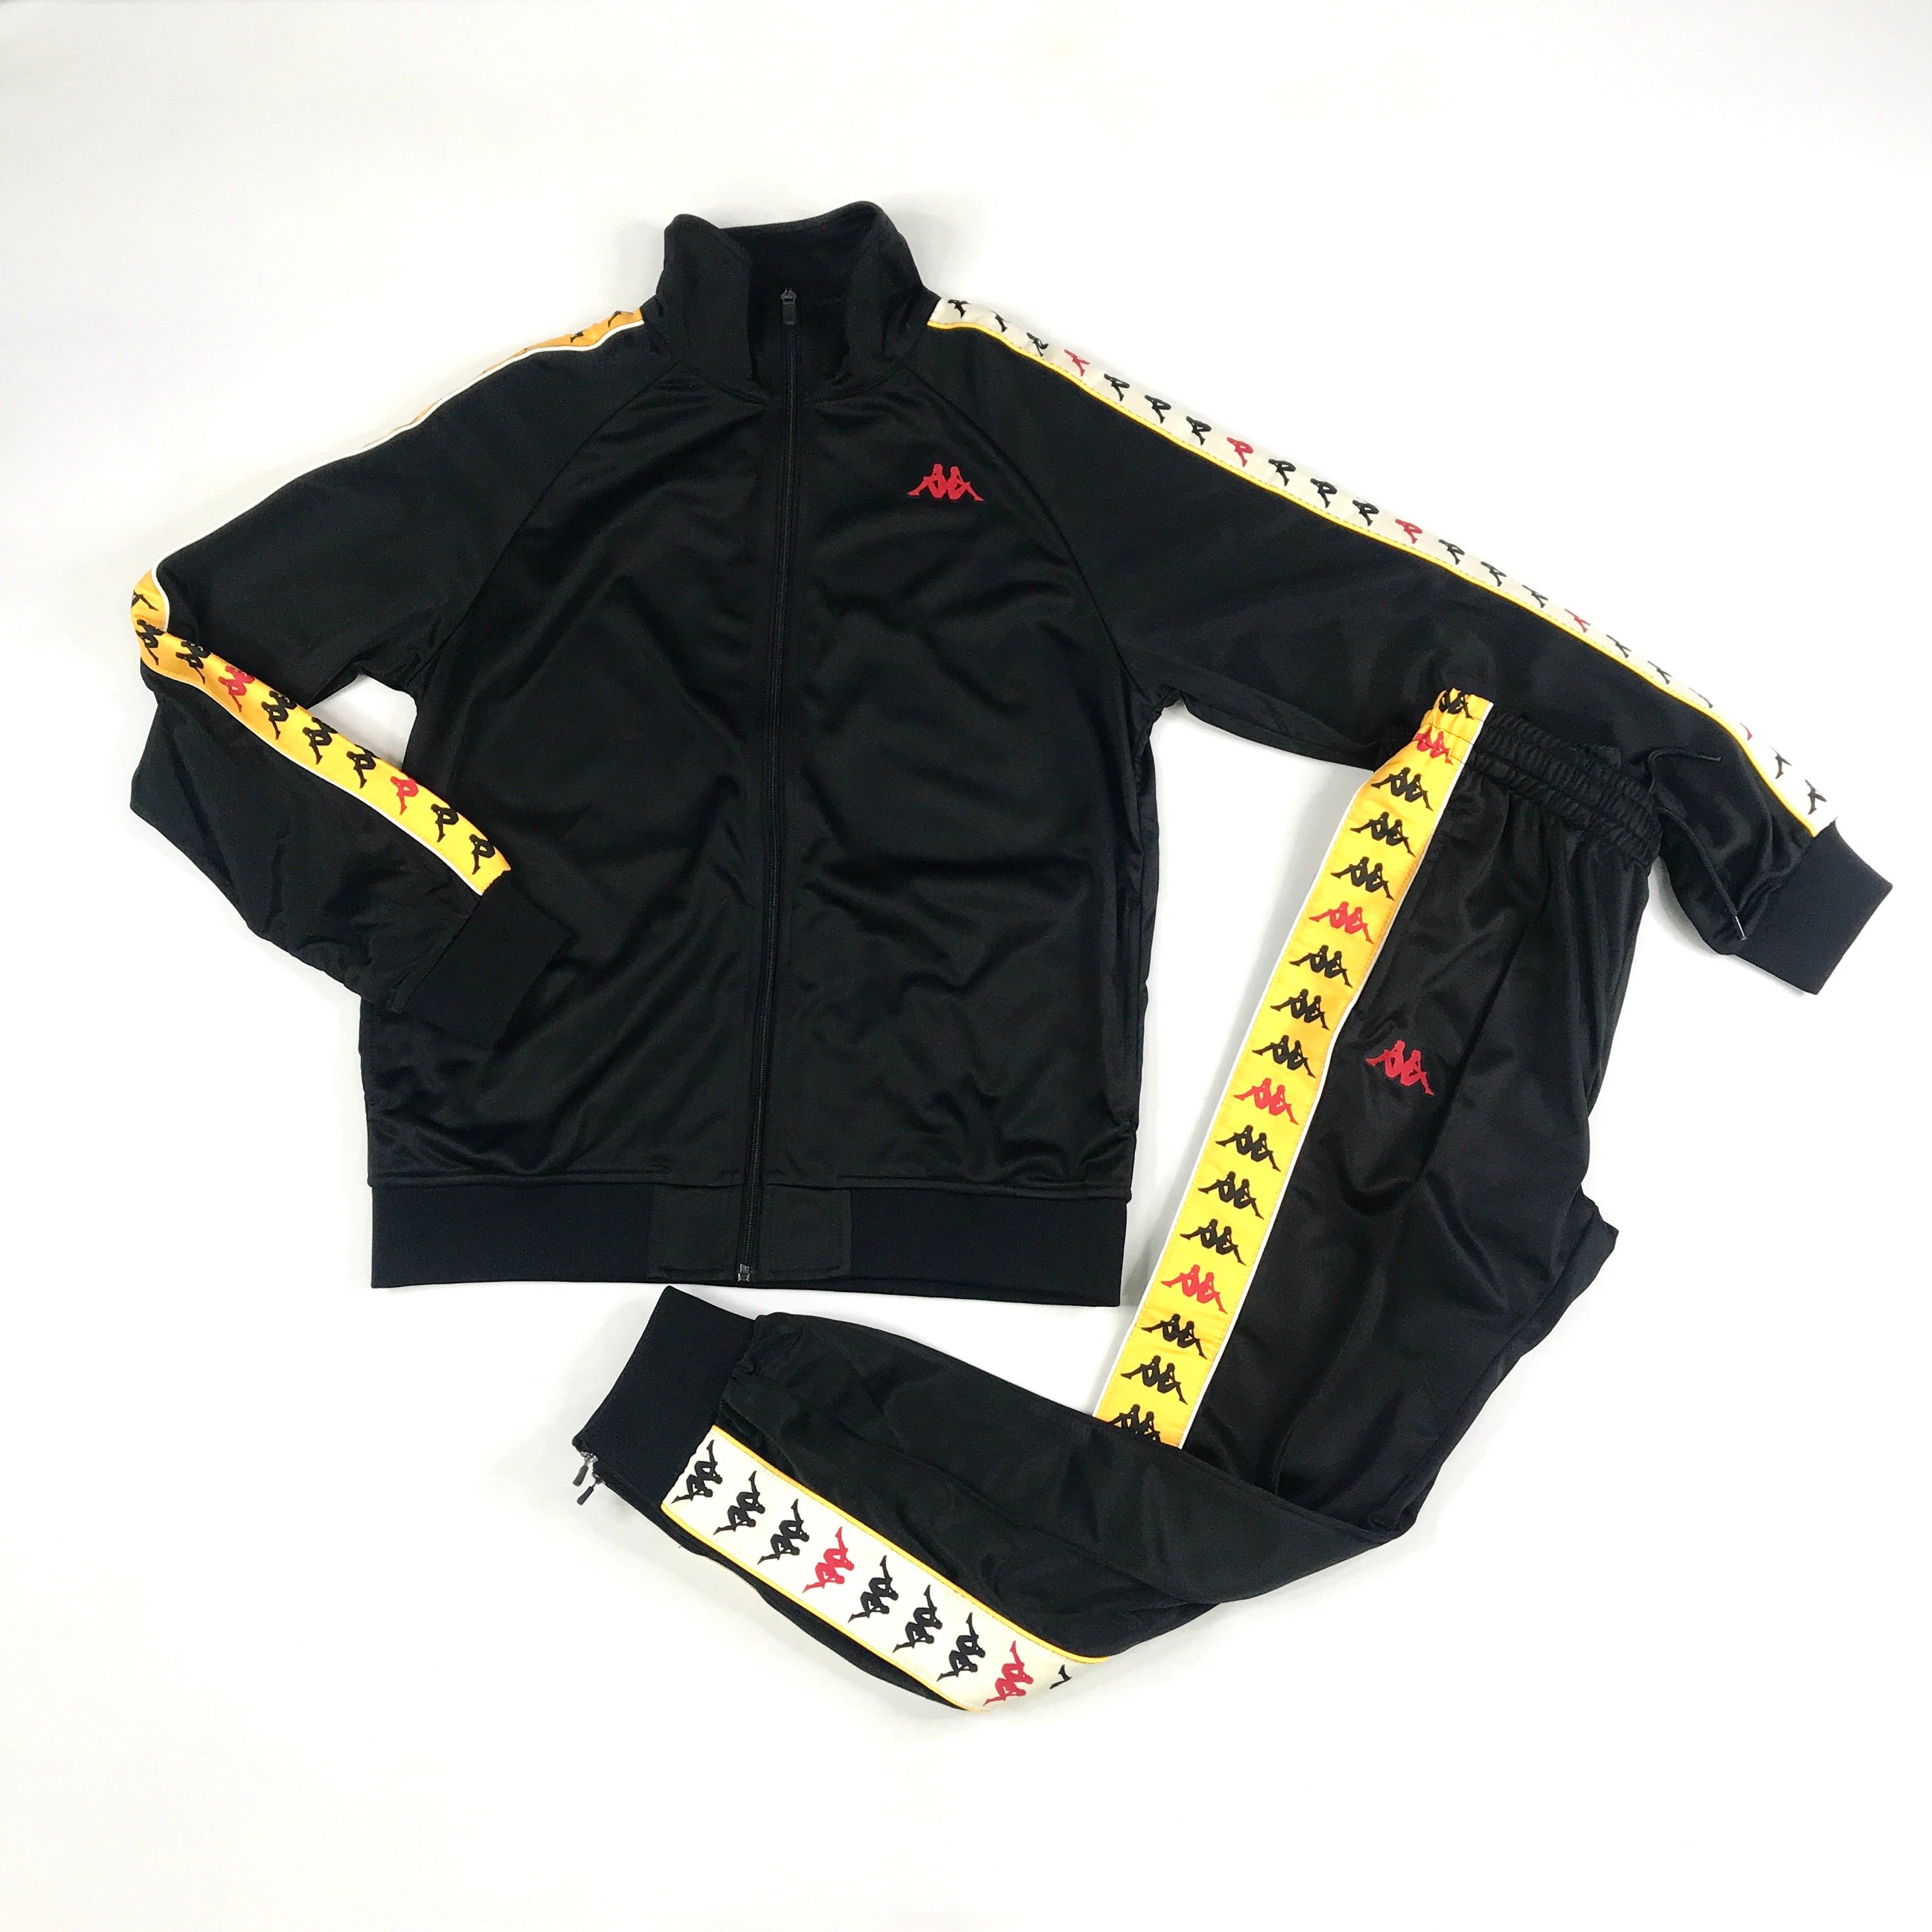 Kappa Dullo tracksuit in black-red-gold R.O.K. Island Clothing